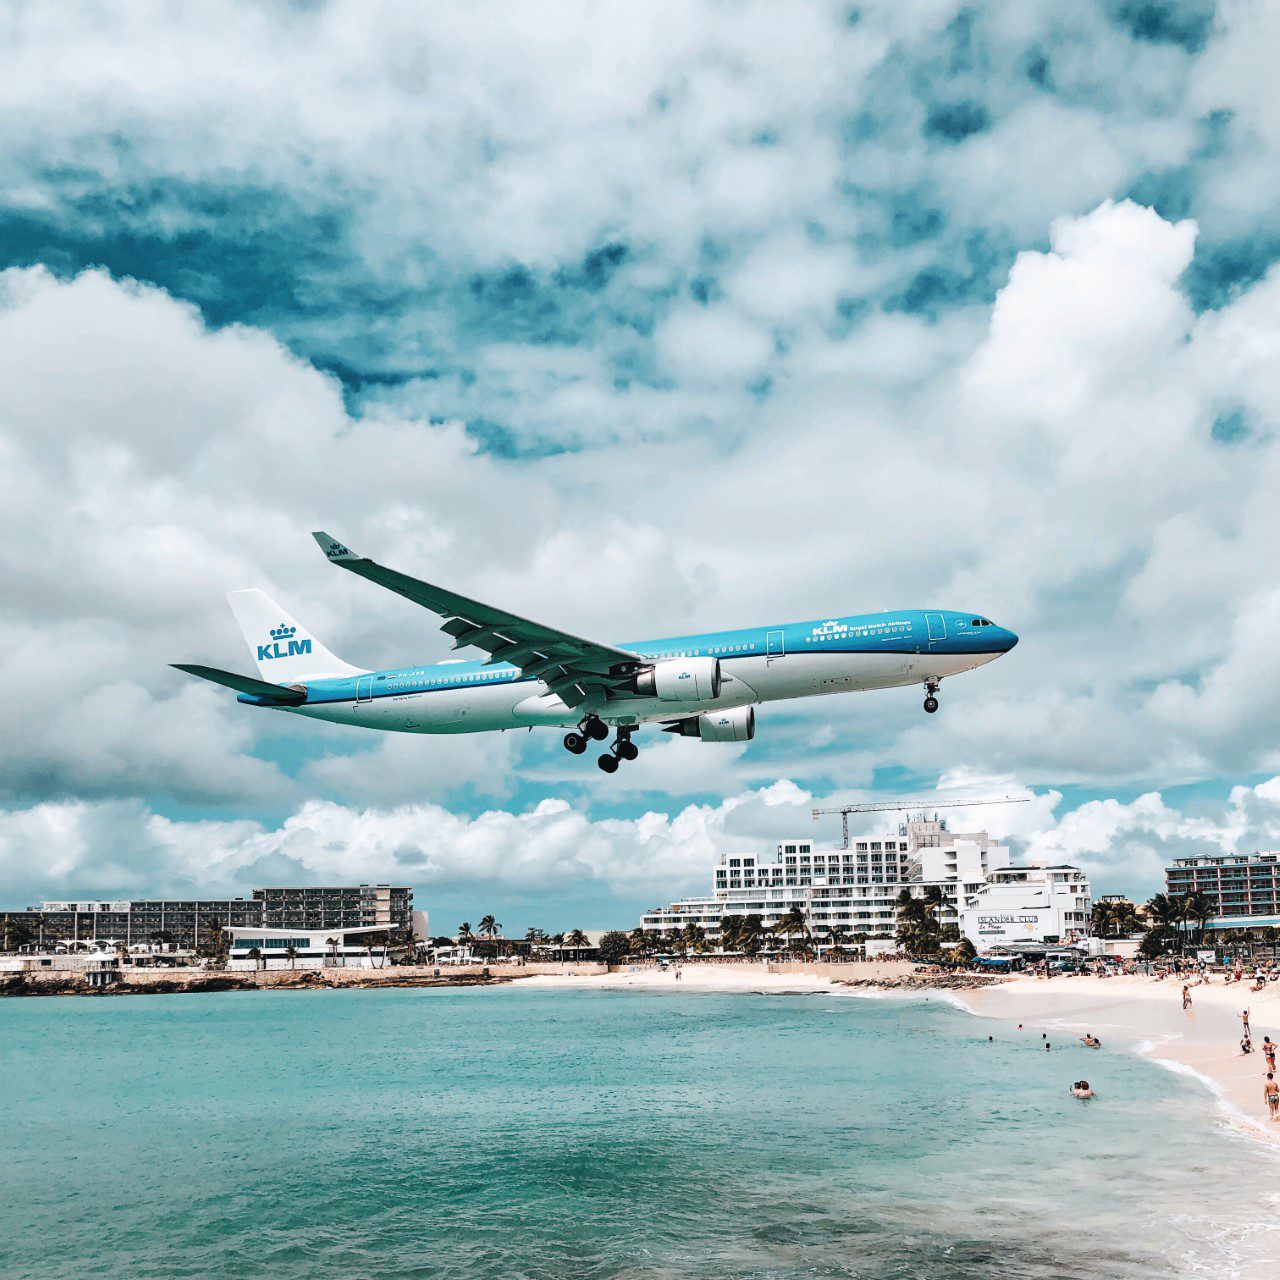 Plane Spotting in St Maarten - A Day at Maho Beach - Caribbean